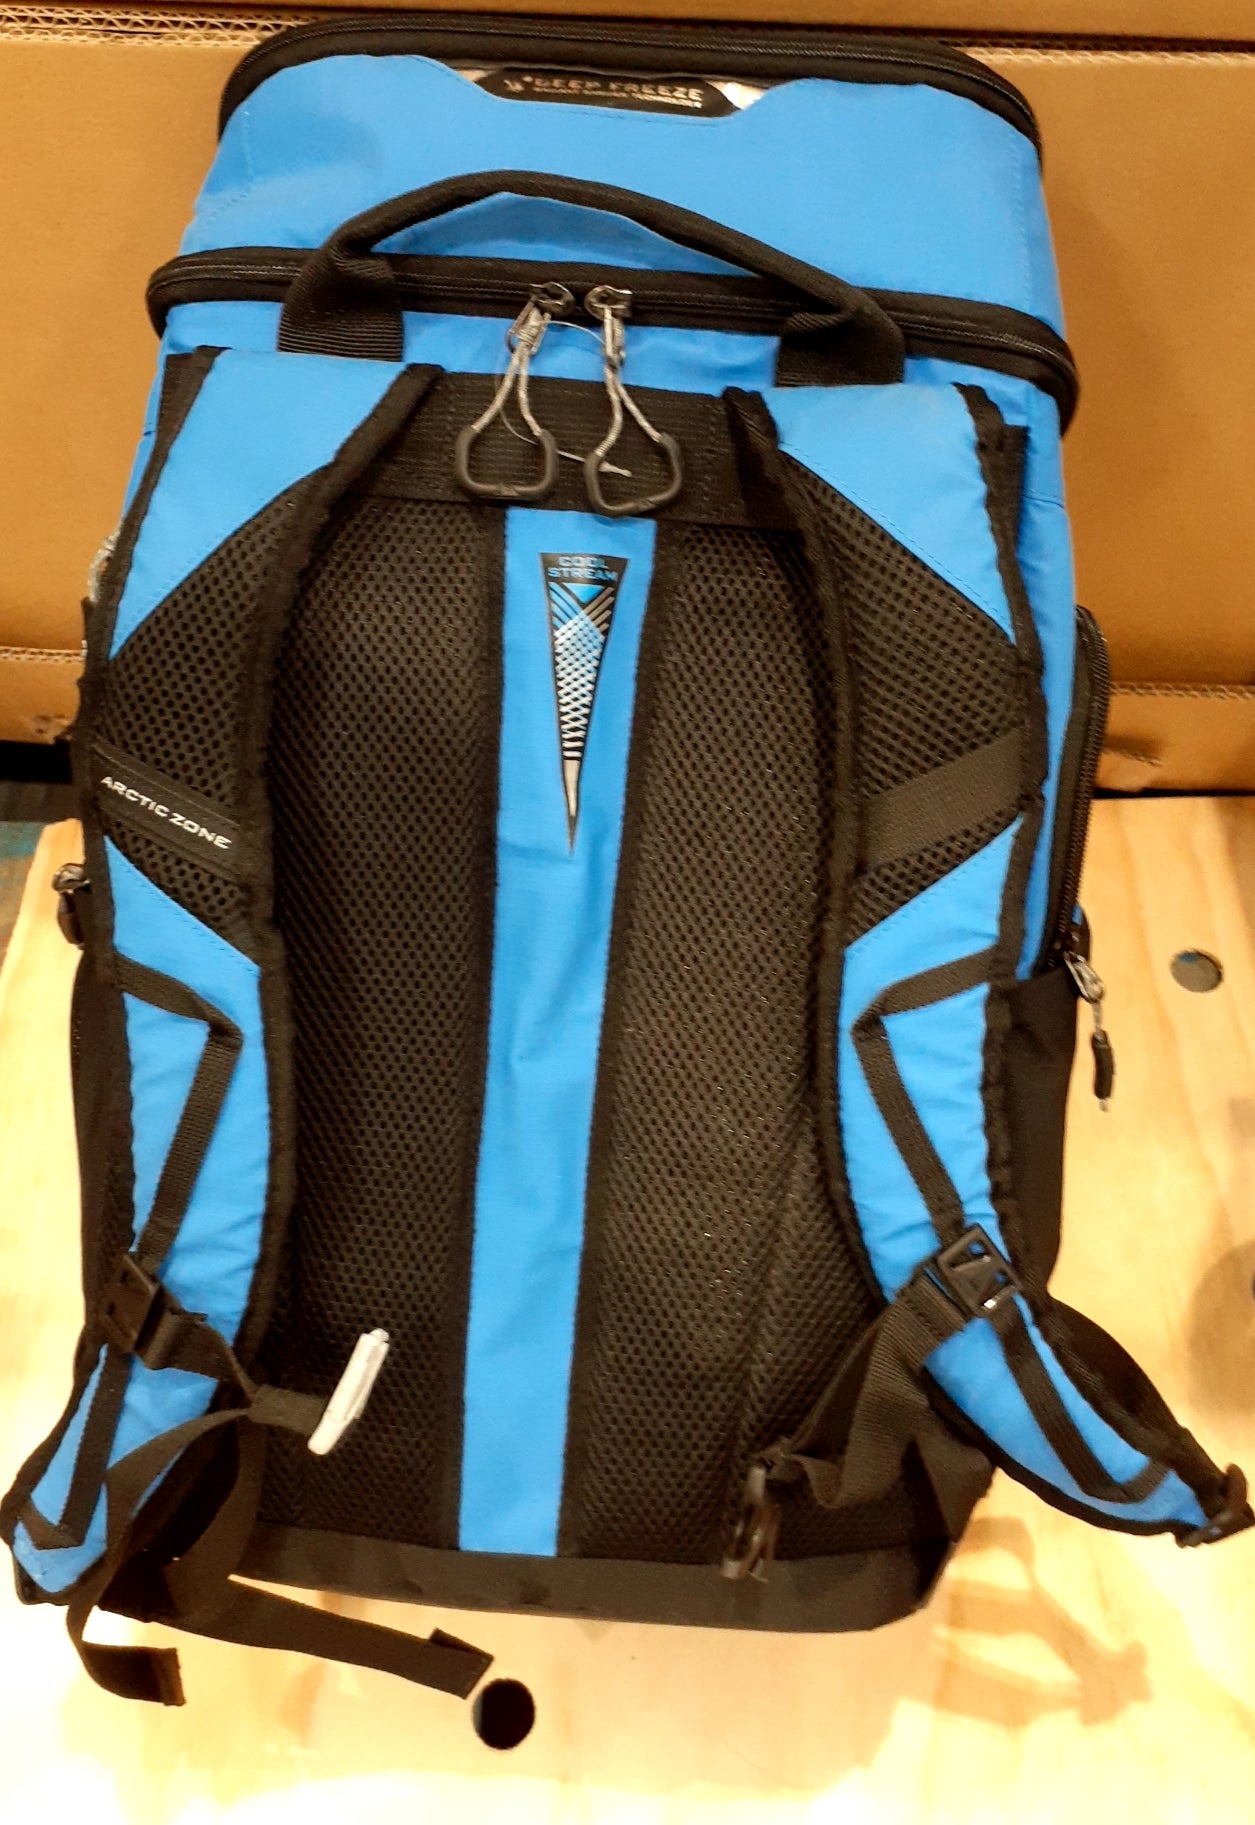 Titan cooler bag w/ ICE WALLS keeps 26 cans ice cold for 2 days FAST SHIPPING!